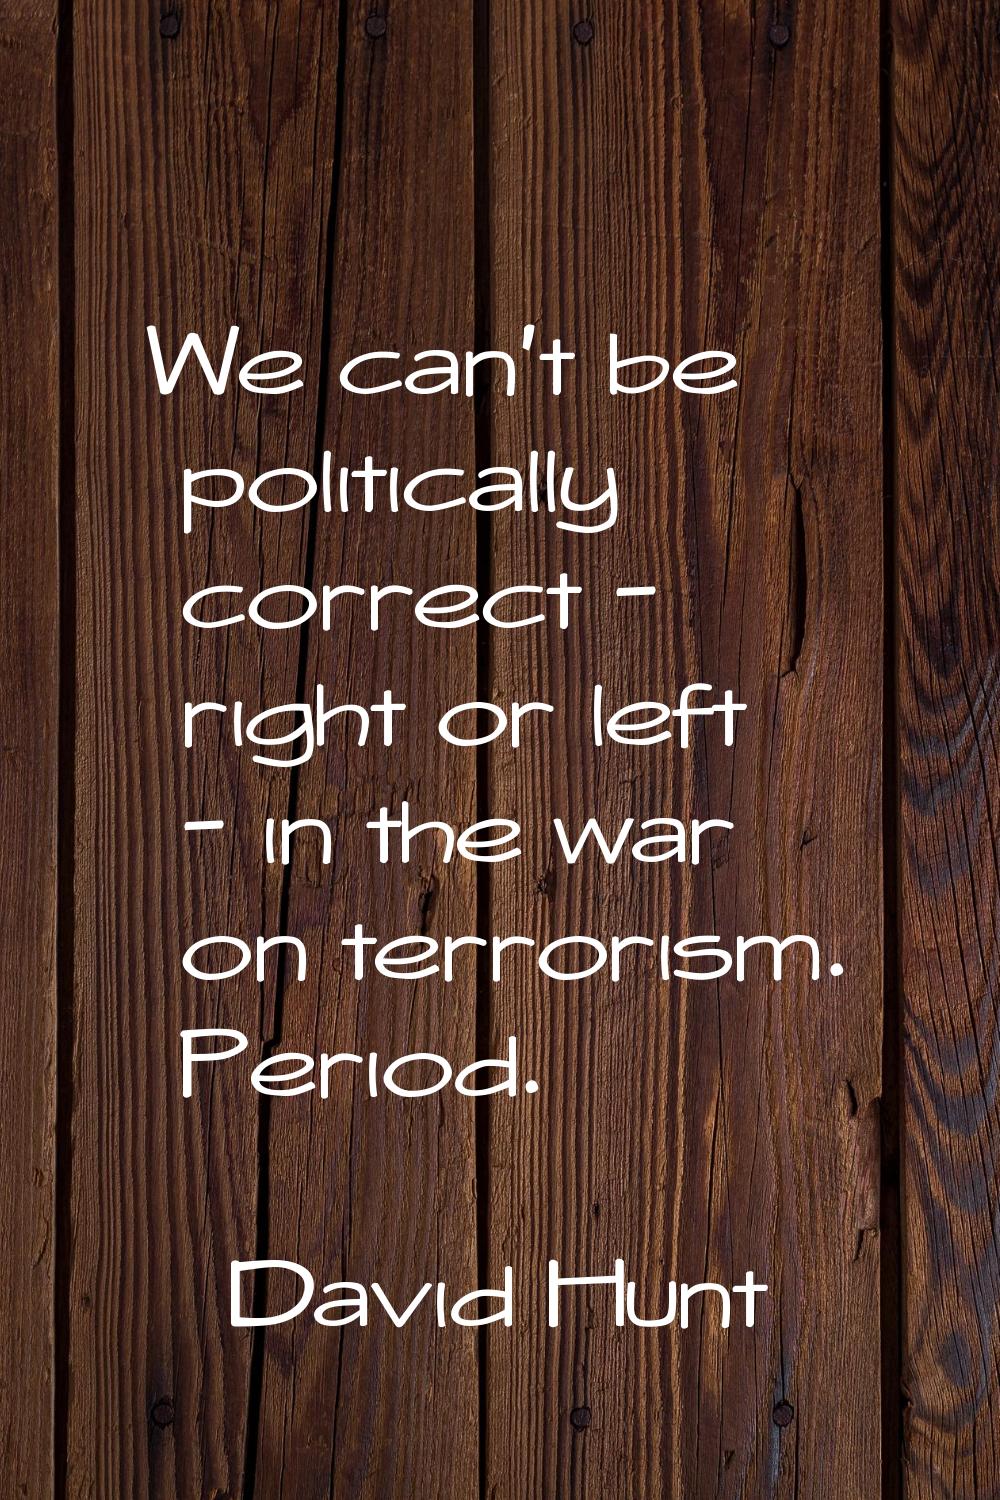 We can't be politically correct - right or left - in the war on terrorism. Period.